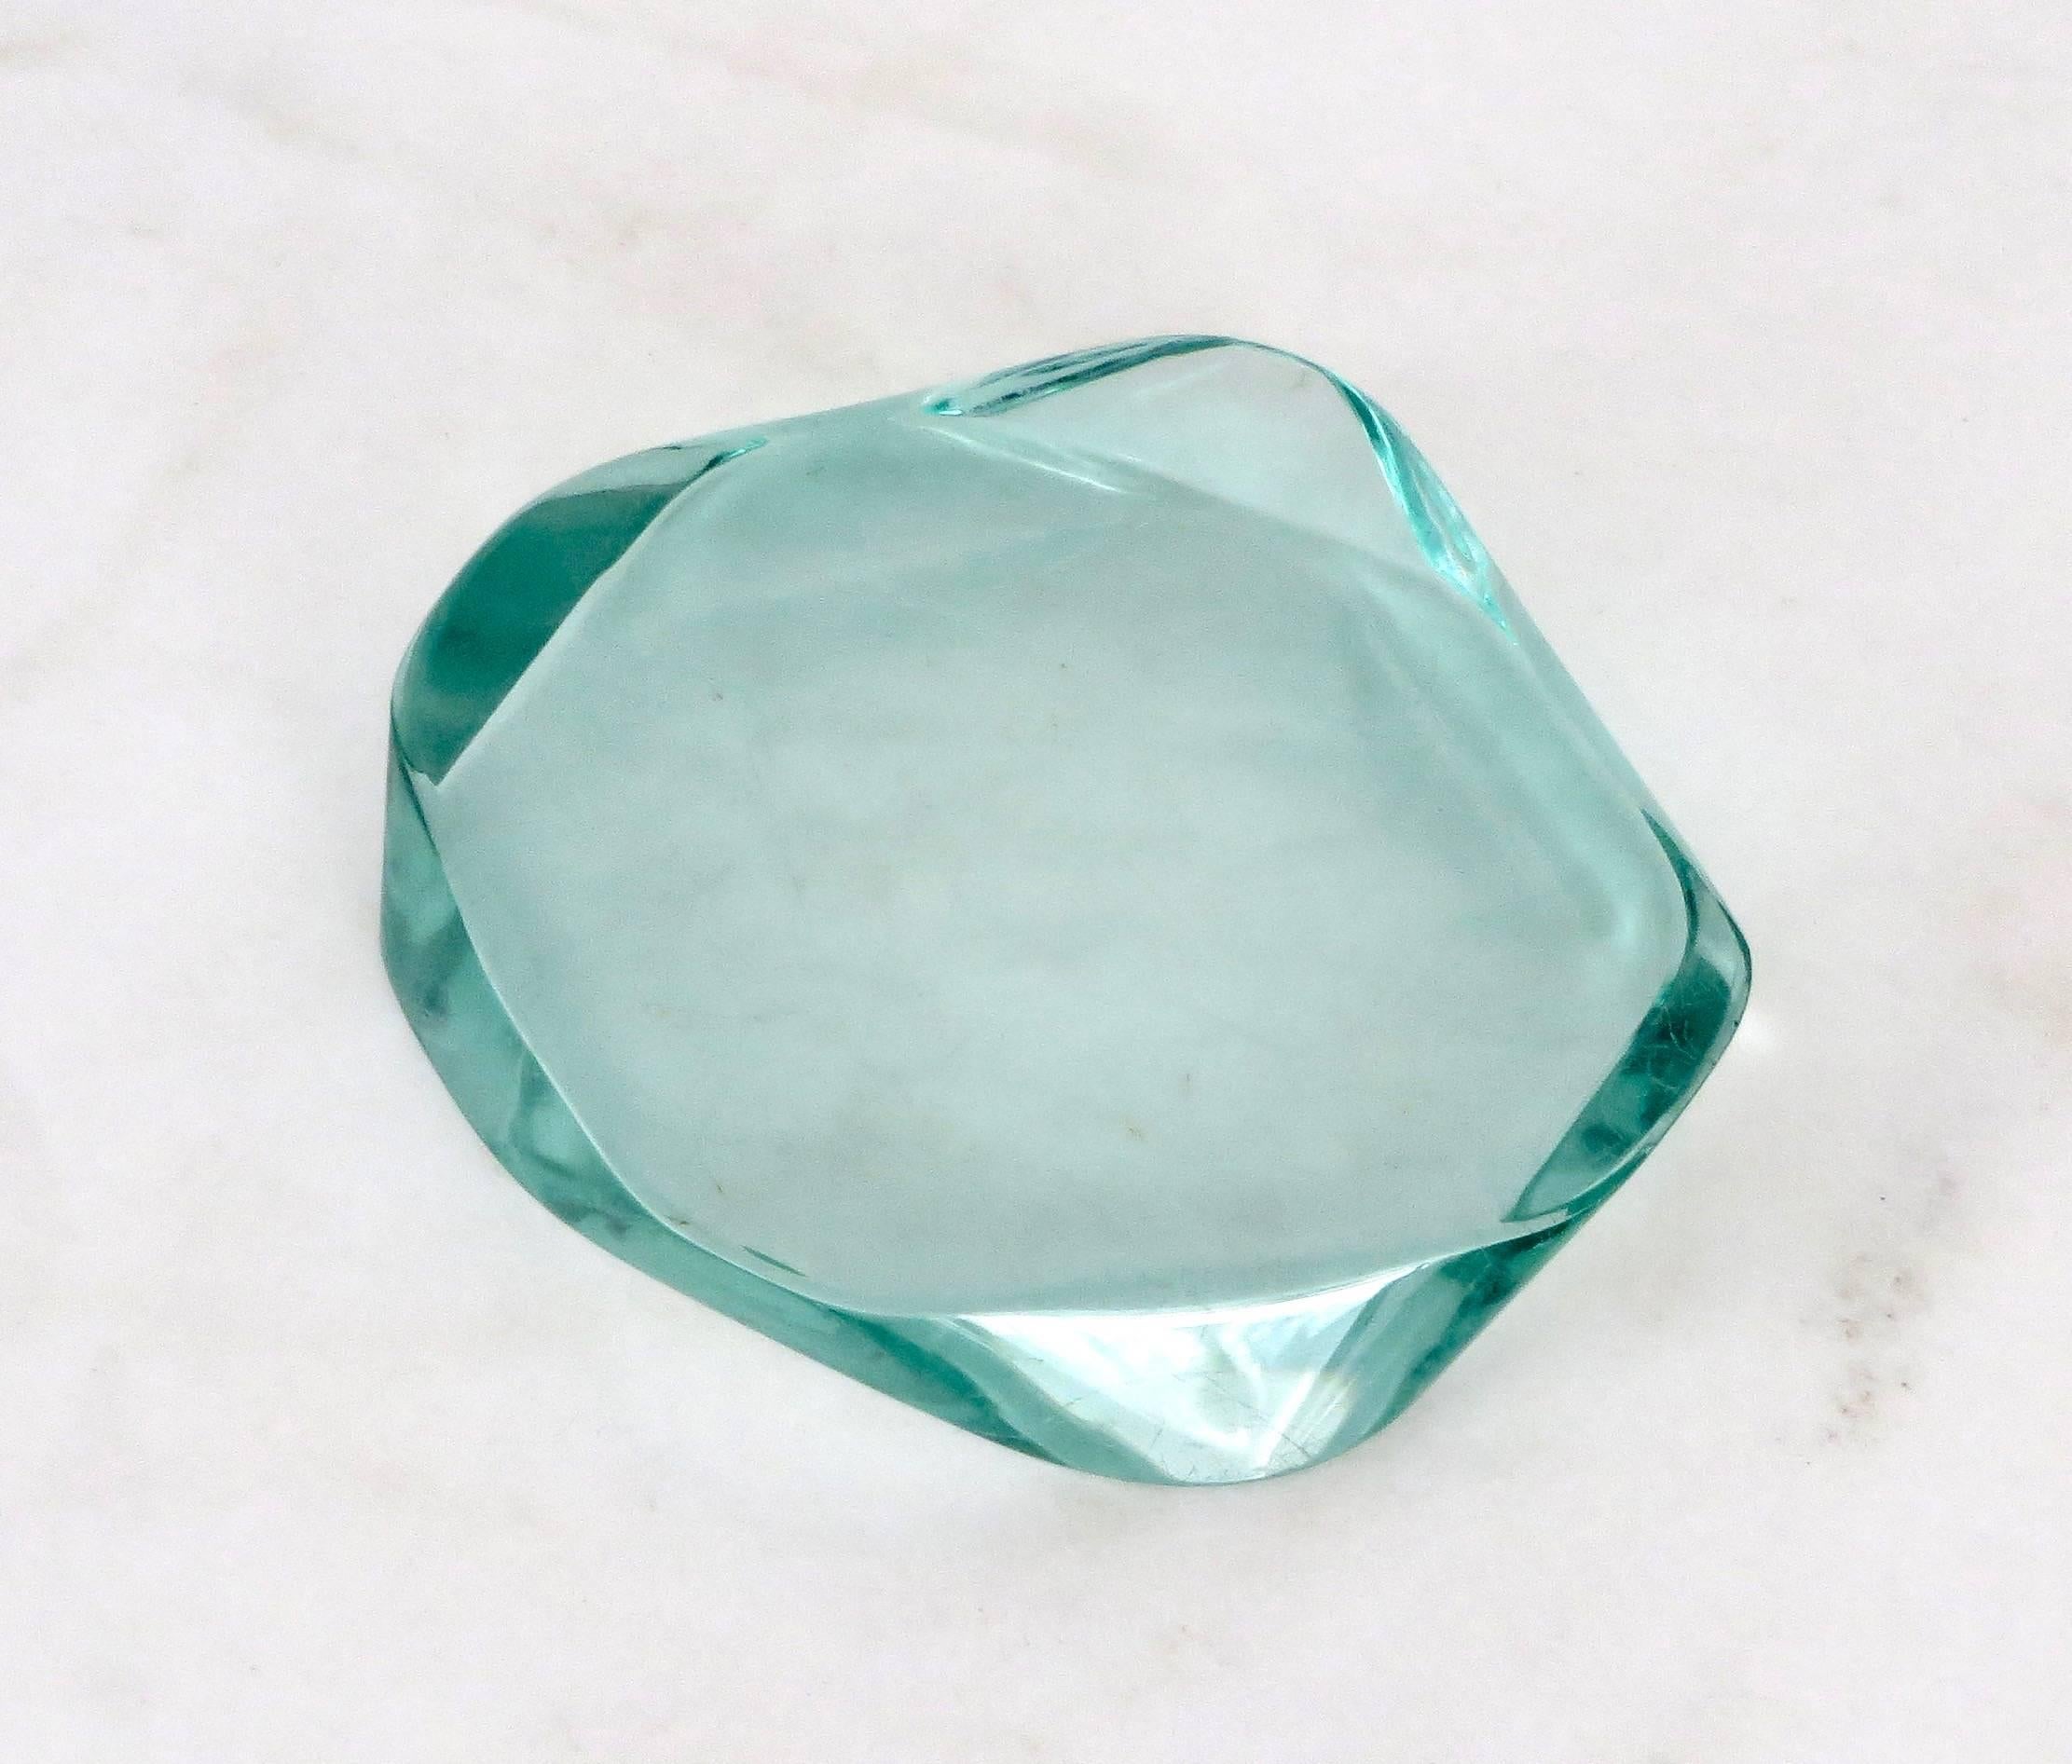 Round sculpted edge and glass dish designed by Max Ingrand for Fontana Arte, circa 1960.
Rare collectable crystal bowl, dish, candy dish or vide poche with wavy edges by Italian master designer Max Ingrand for Fontana Arte. Engraved with FA on the